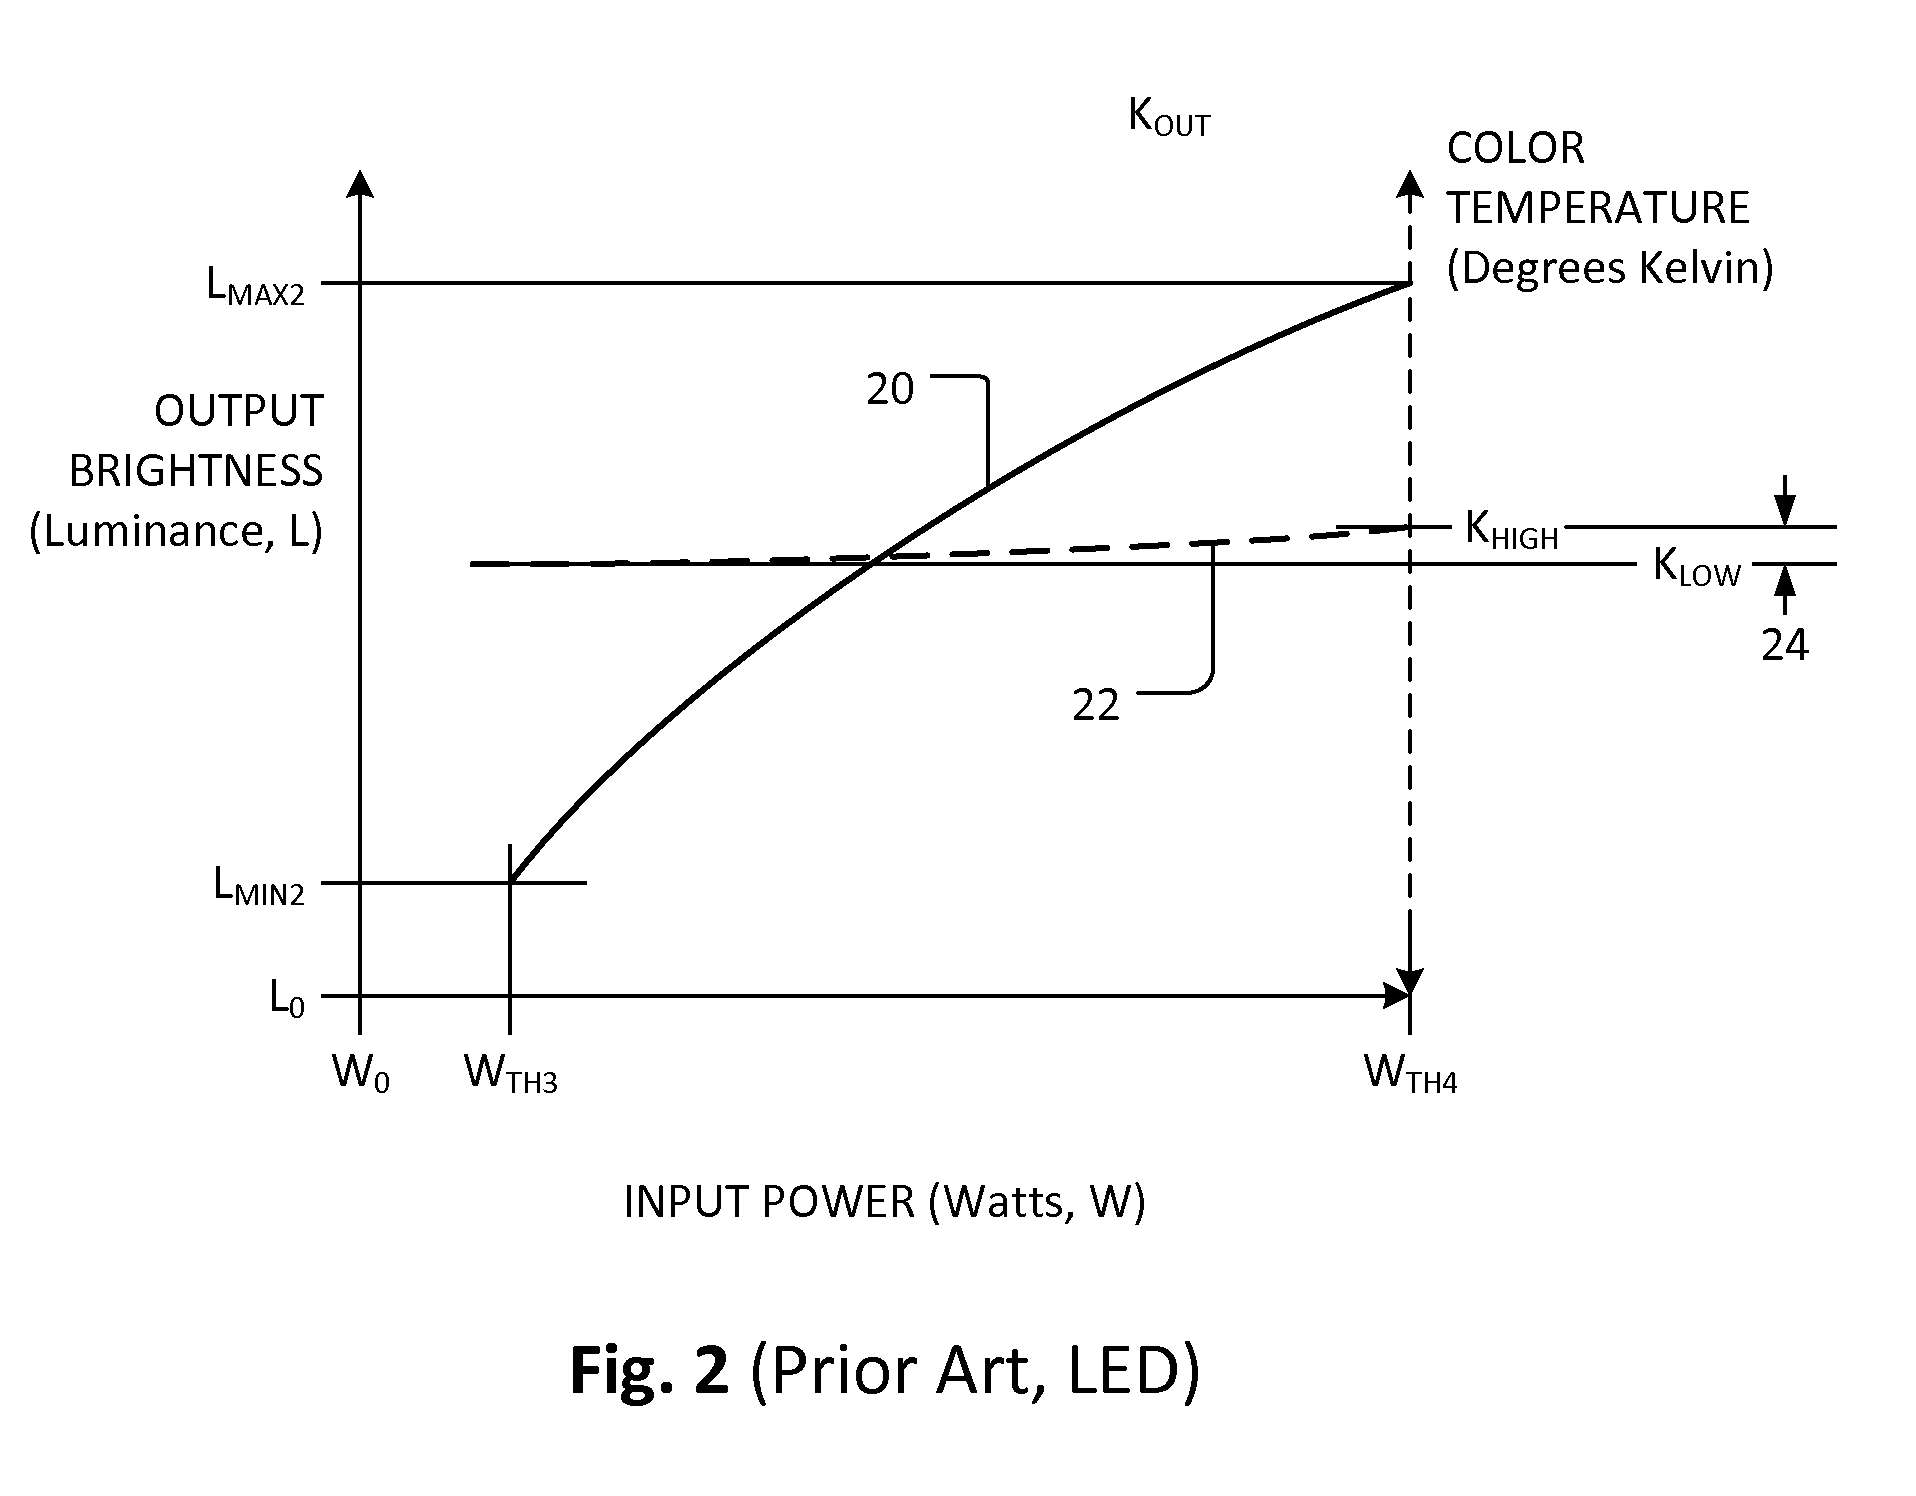 LED emulation of incandescent bulb brightness and color response to varying power input and dimmer circuit therefor